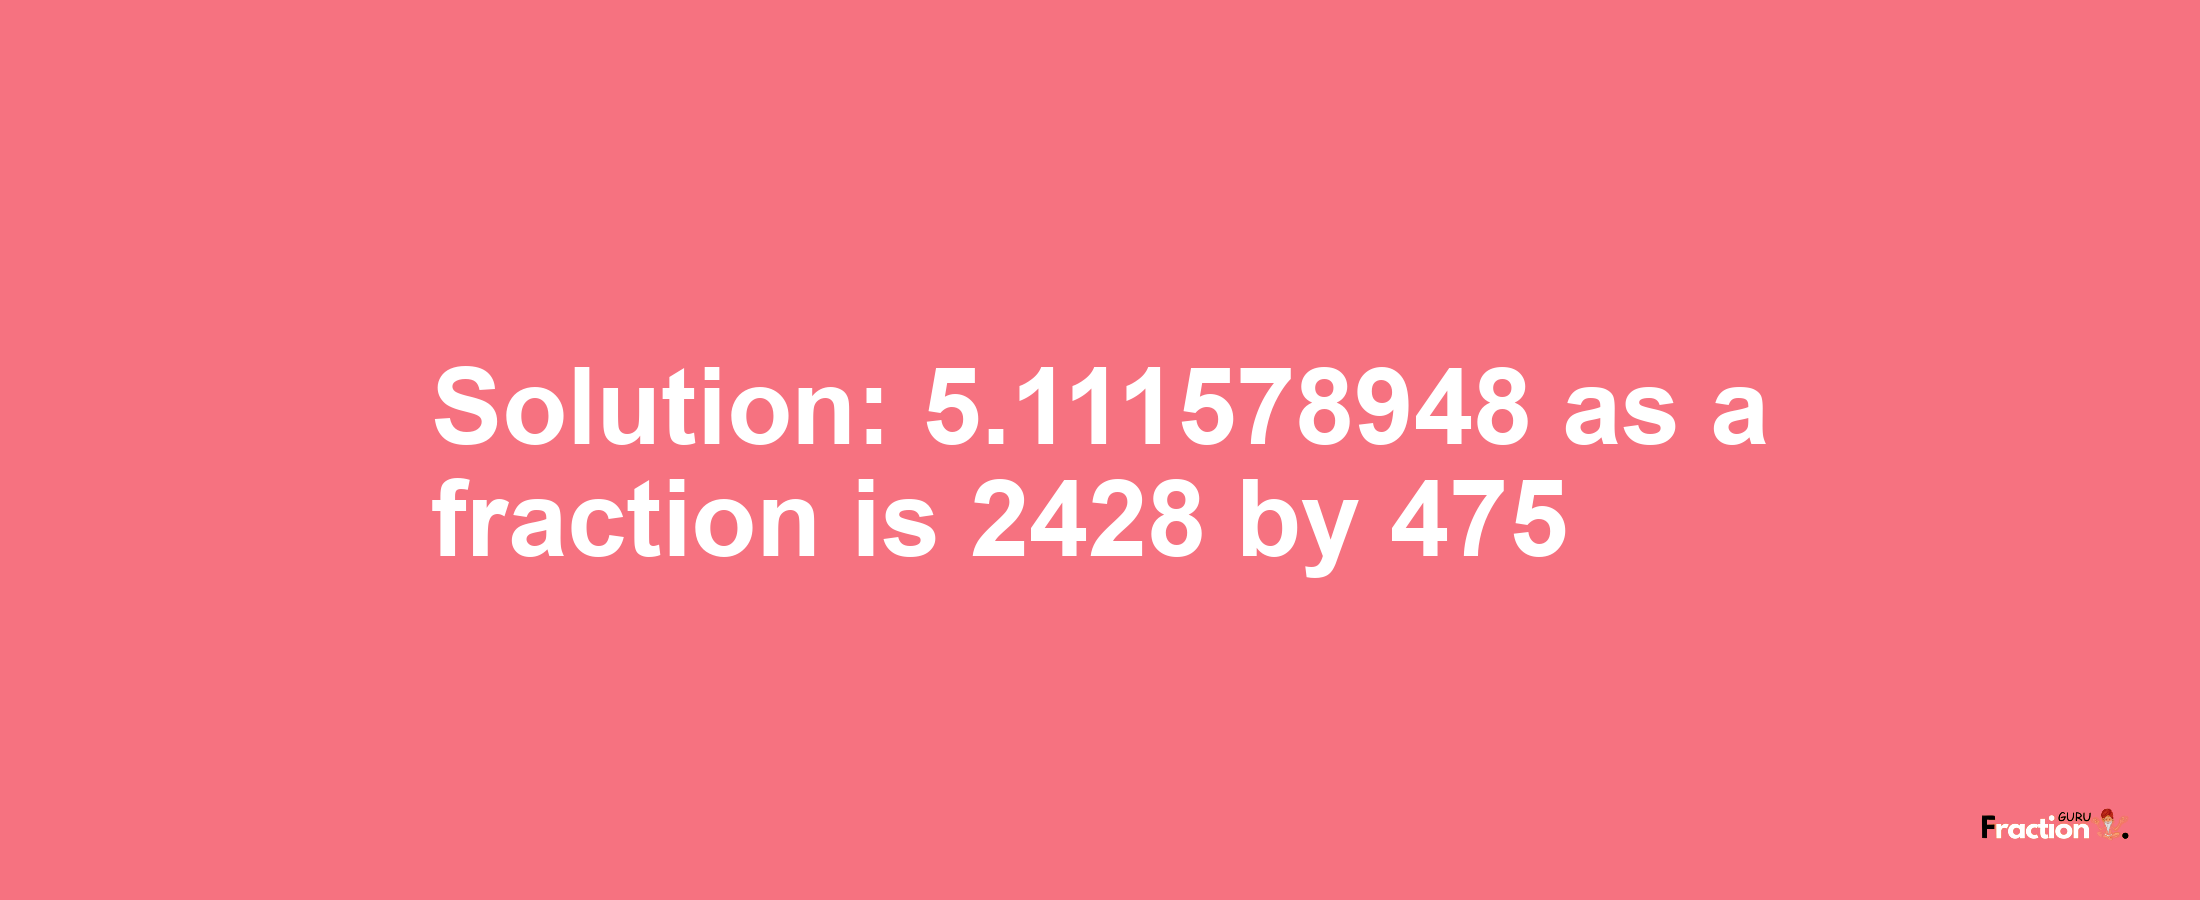 Solution:5.111578948 as a fraction is 2428/475